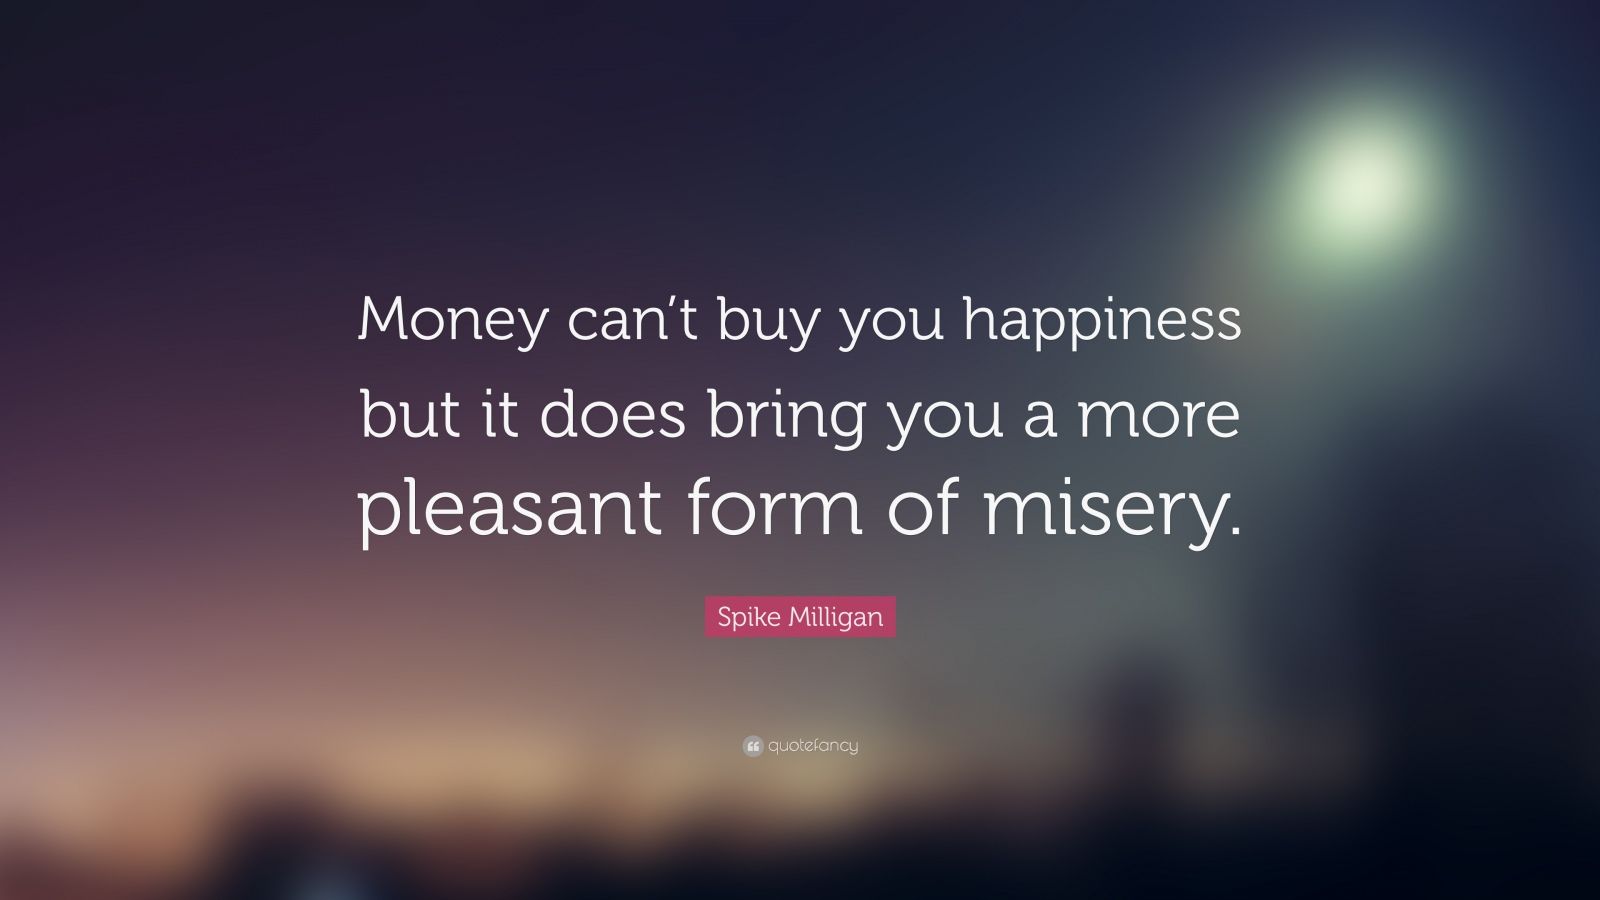 Do you believe money can buy happiness essay